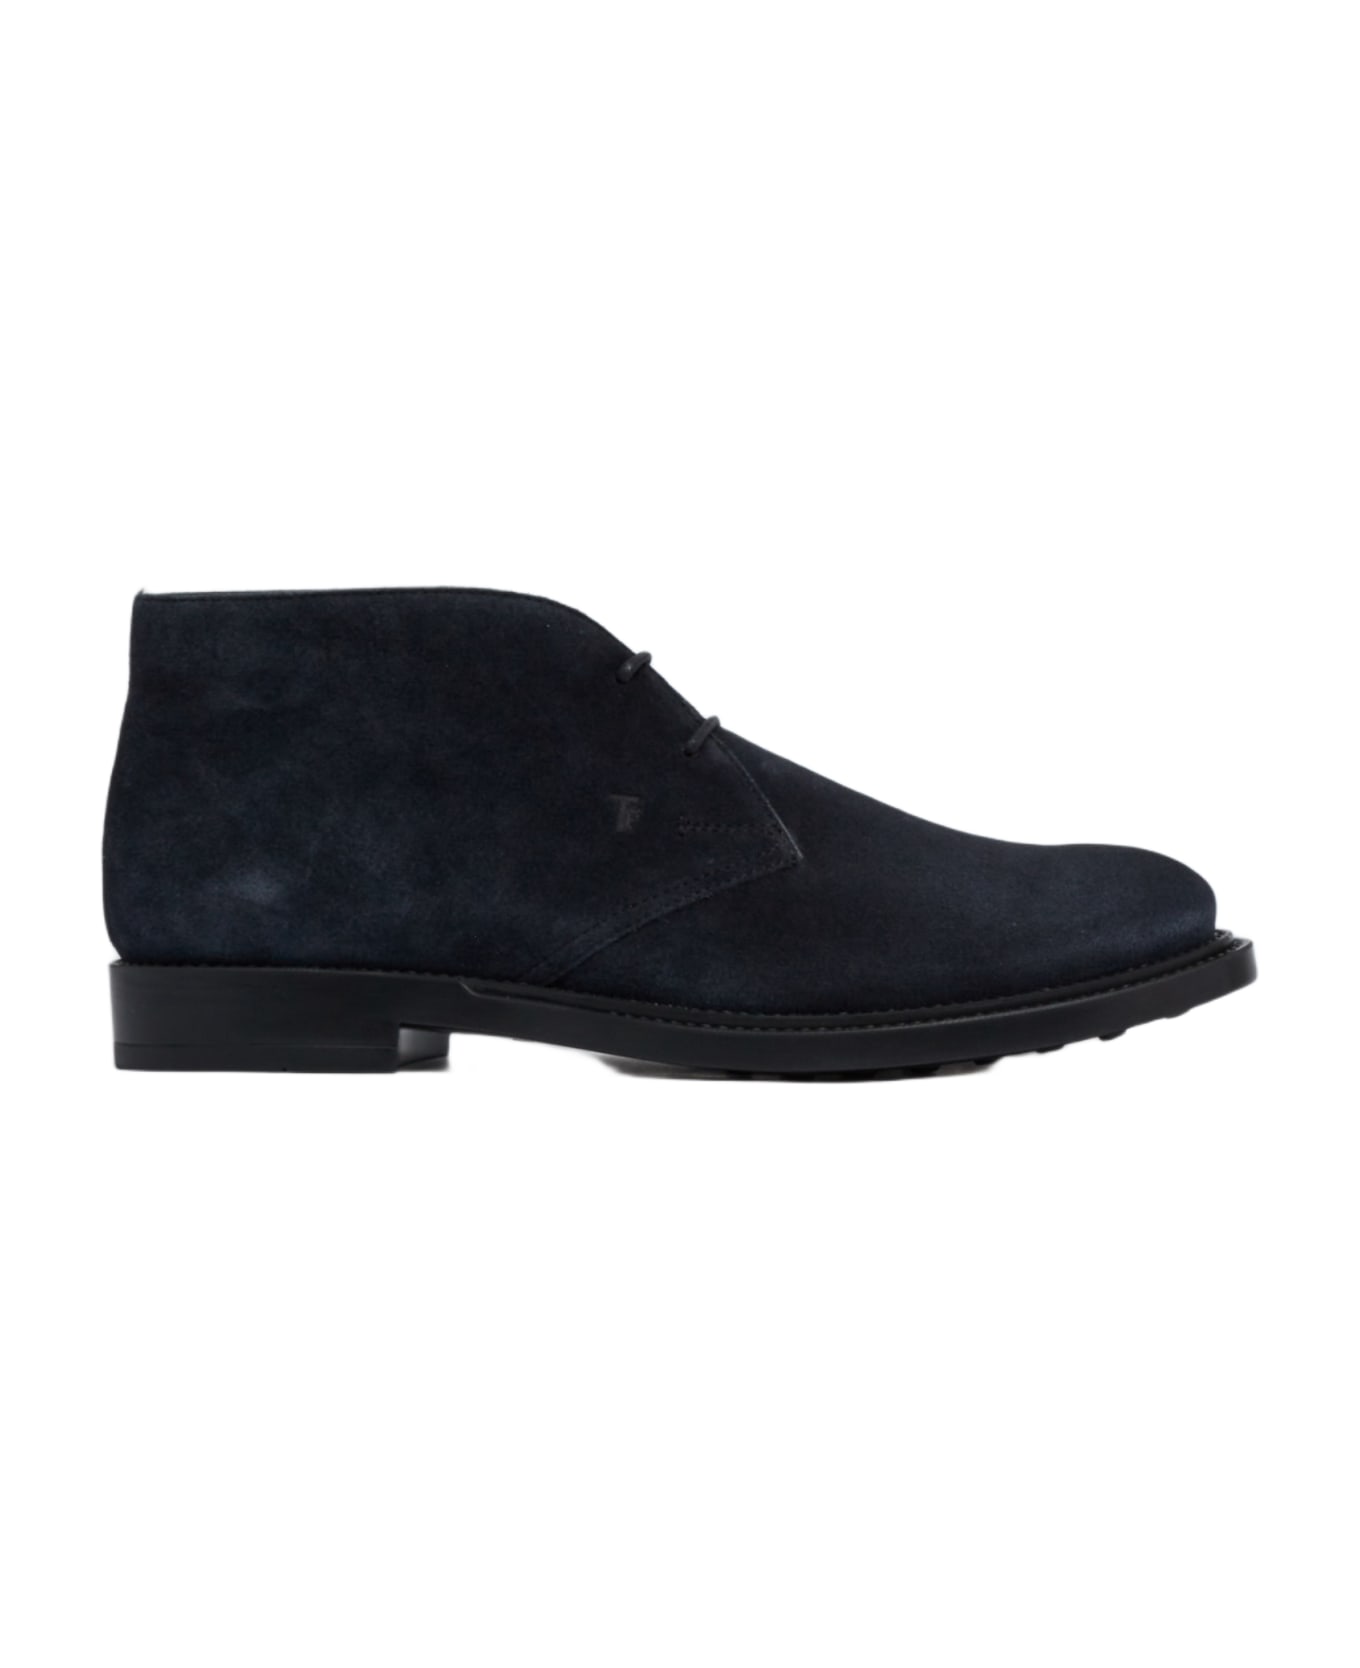 Tod's Polacco Formale 62c Laced Shoe - BLU NOTTE